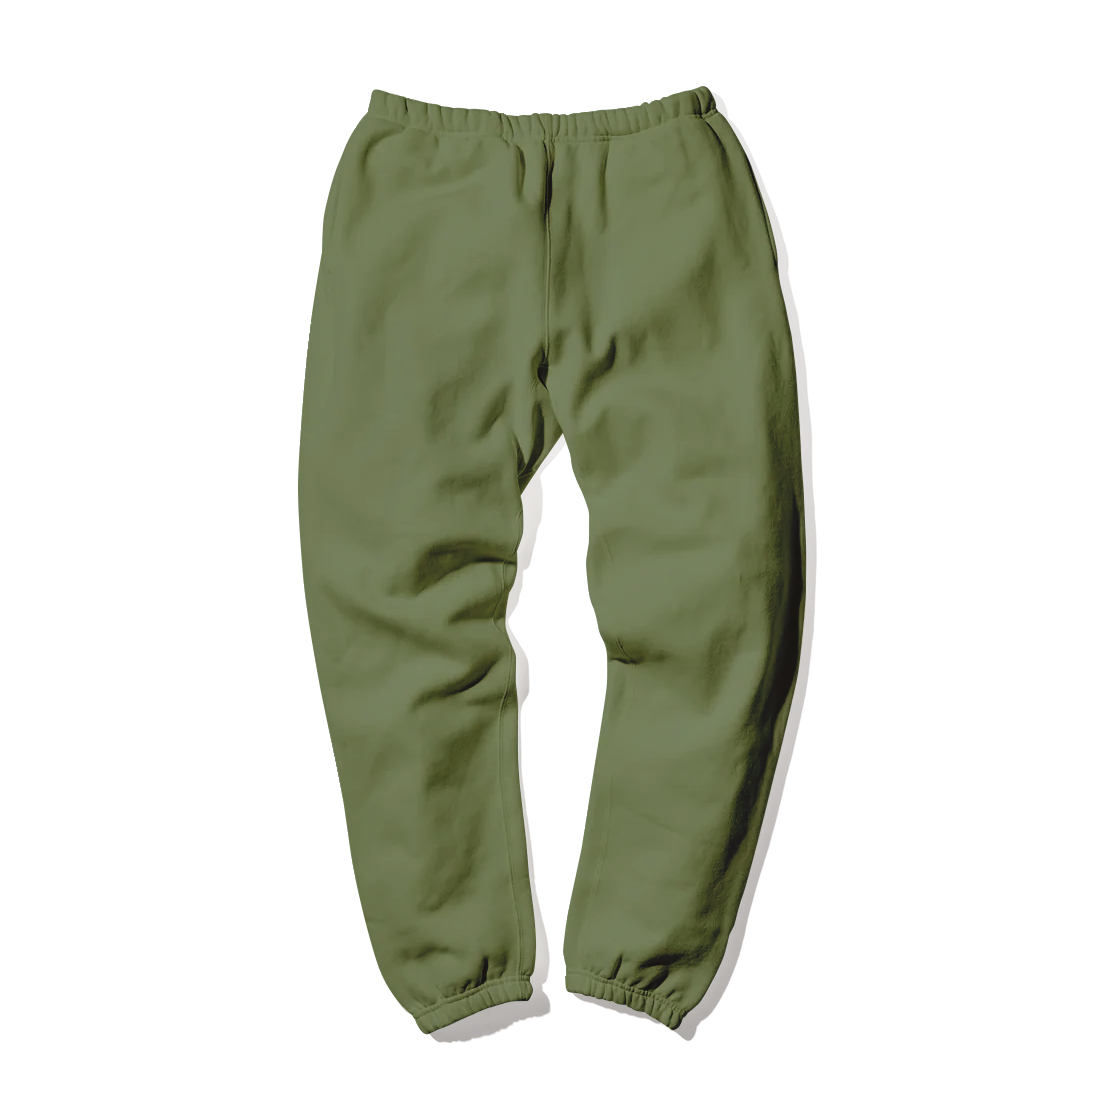 Hand Dyed Sweats - Olive Green